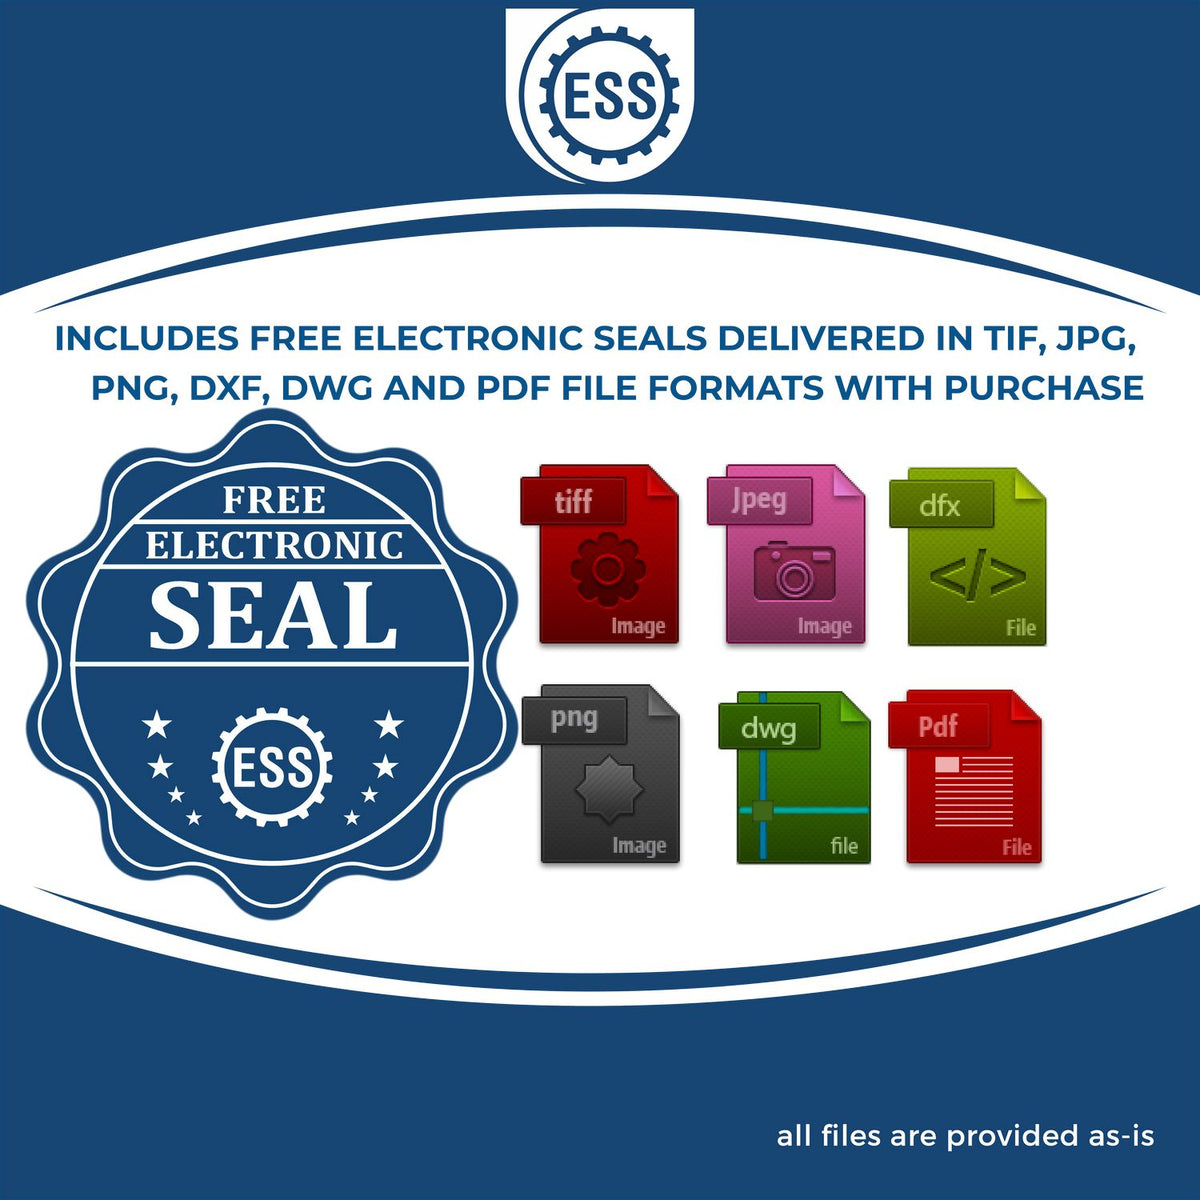 An infographic for the free electronic seal for the Maryland Engineer Desk Seal illustrating the different file type icons such as DXF, DWG, TIF, JPG and PNG.